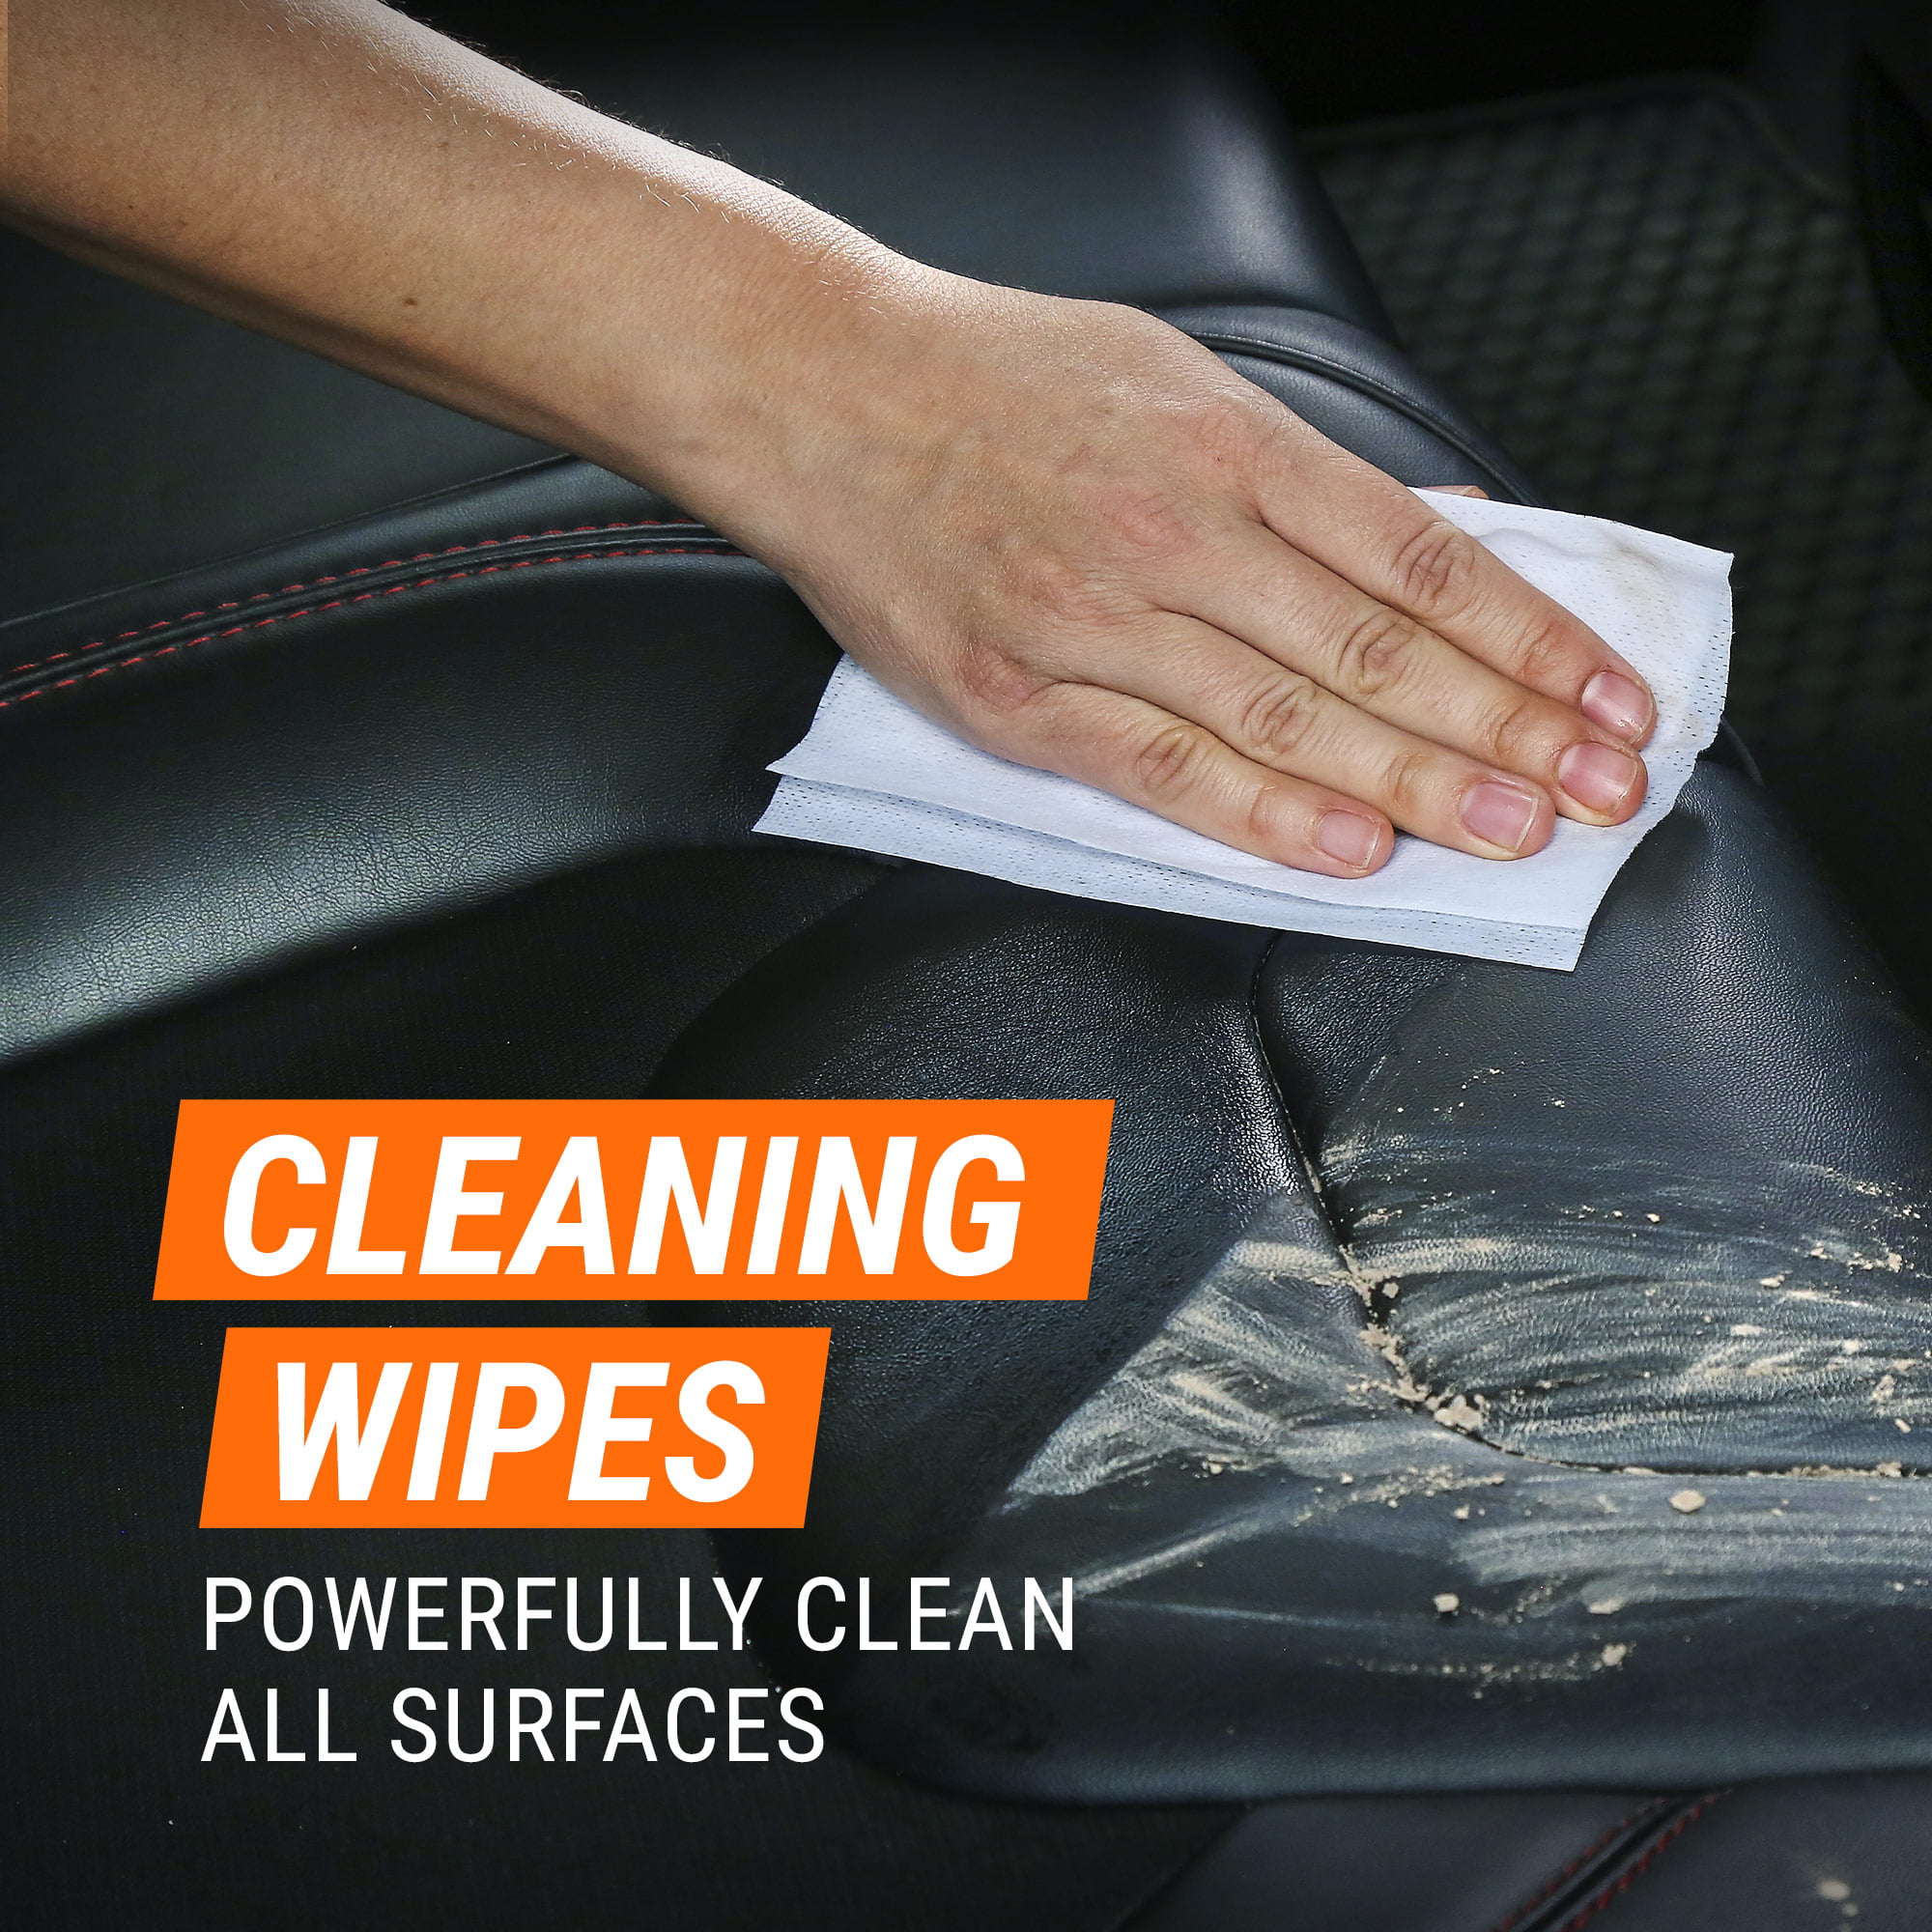 Armor All 30ct 2pk Cleaning/Leather Wipes - Upholstery Ideas